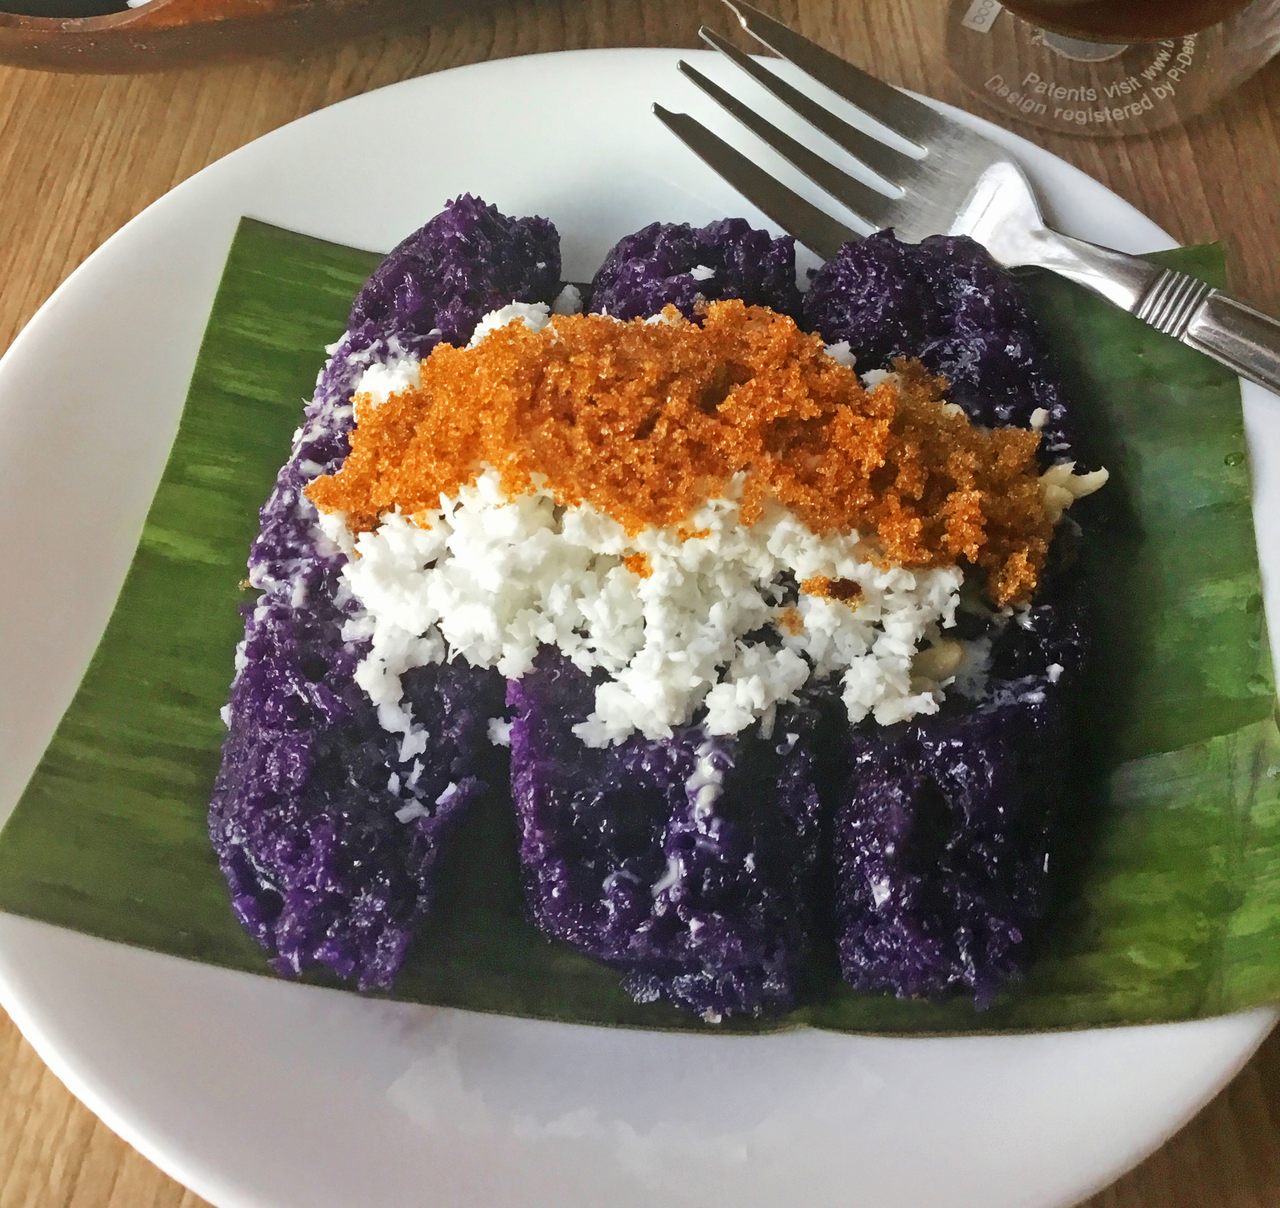 The purple hue traditionally comes from pirurutong rice, but cooks often use ube flavoring for color.